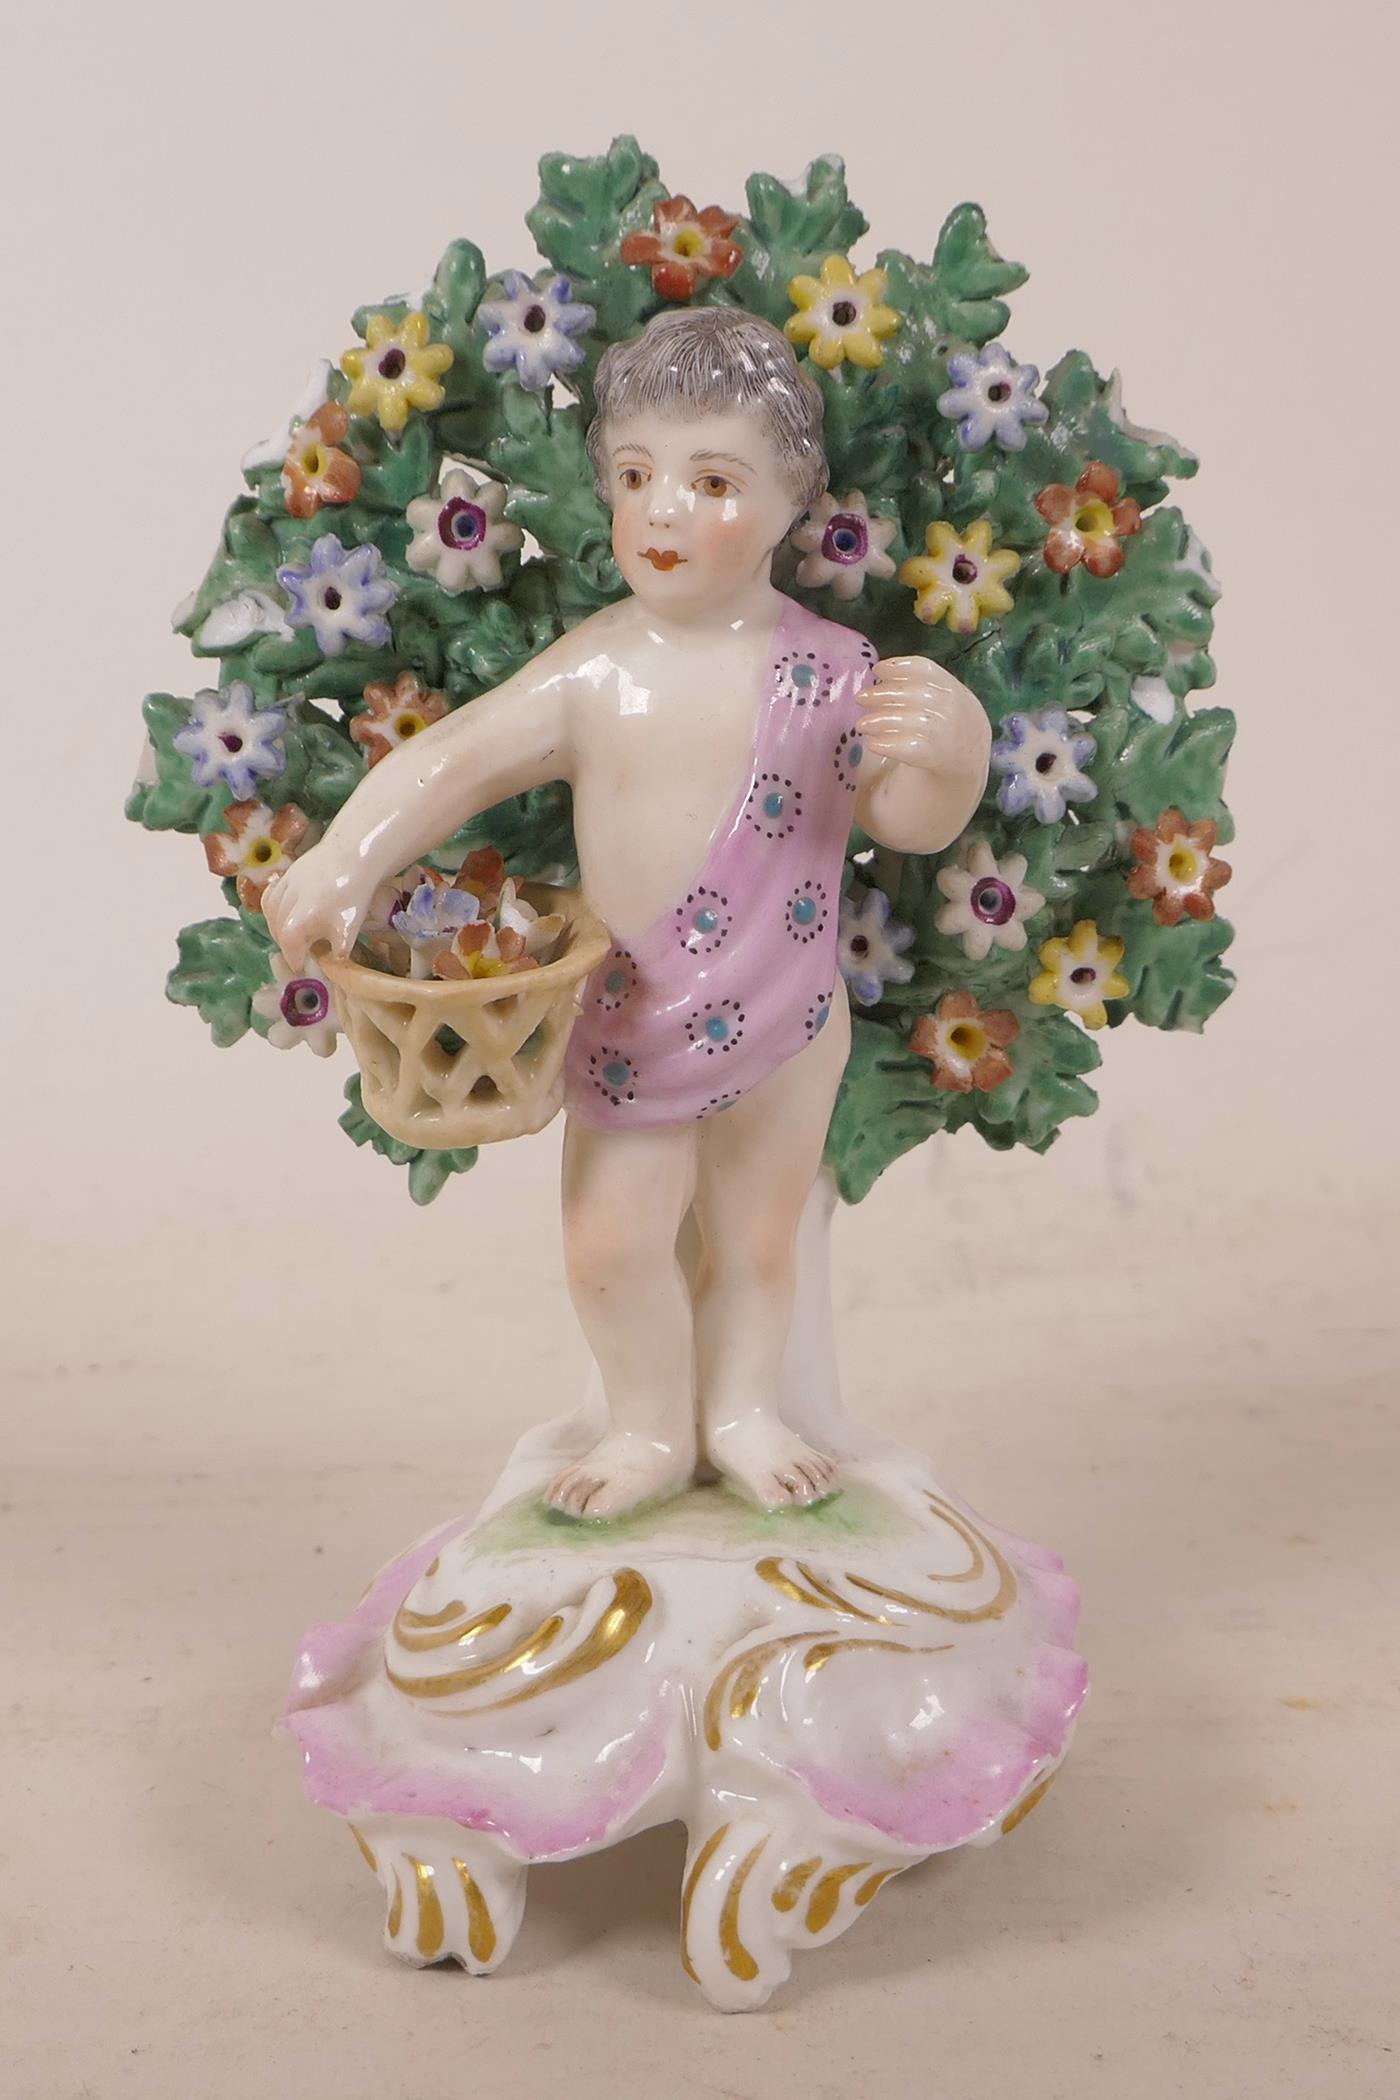 A C19th hard paste porcelain bricolage figurine of a child gathering flowers, bears gold anchor